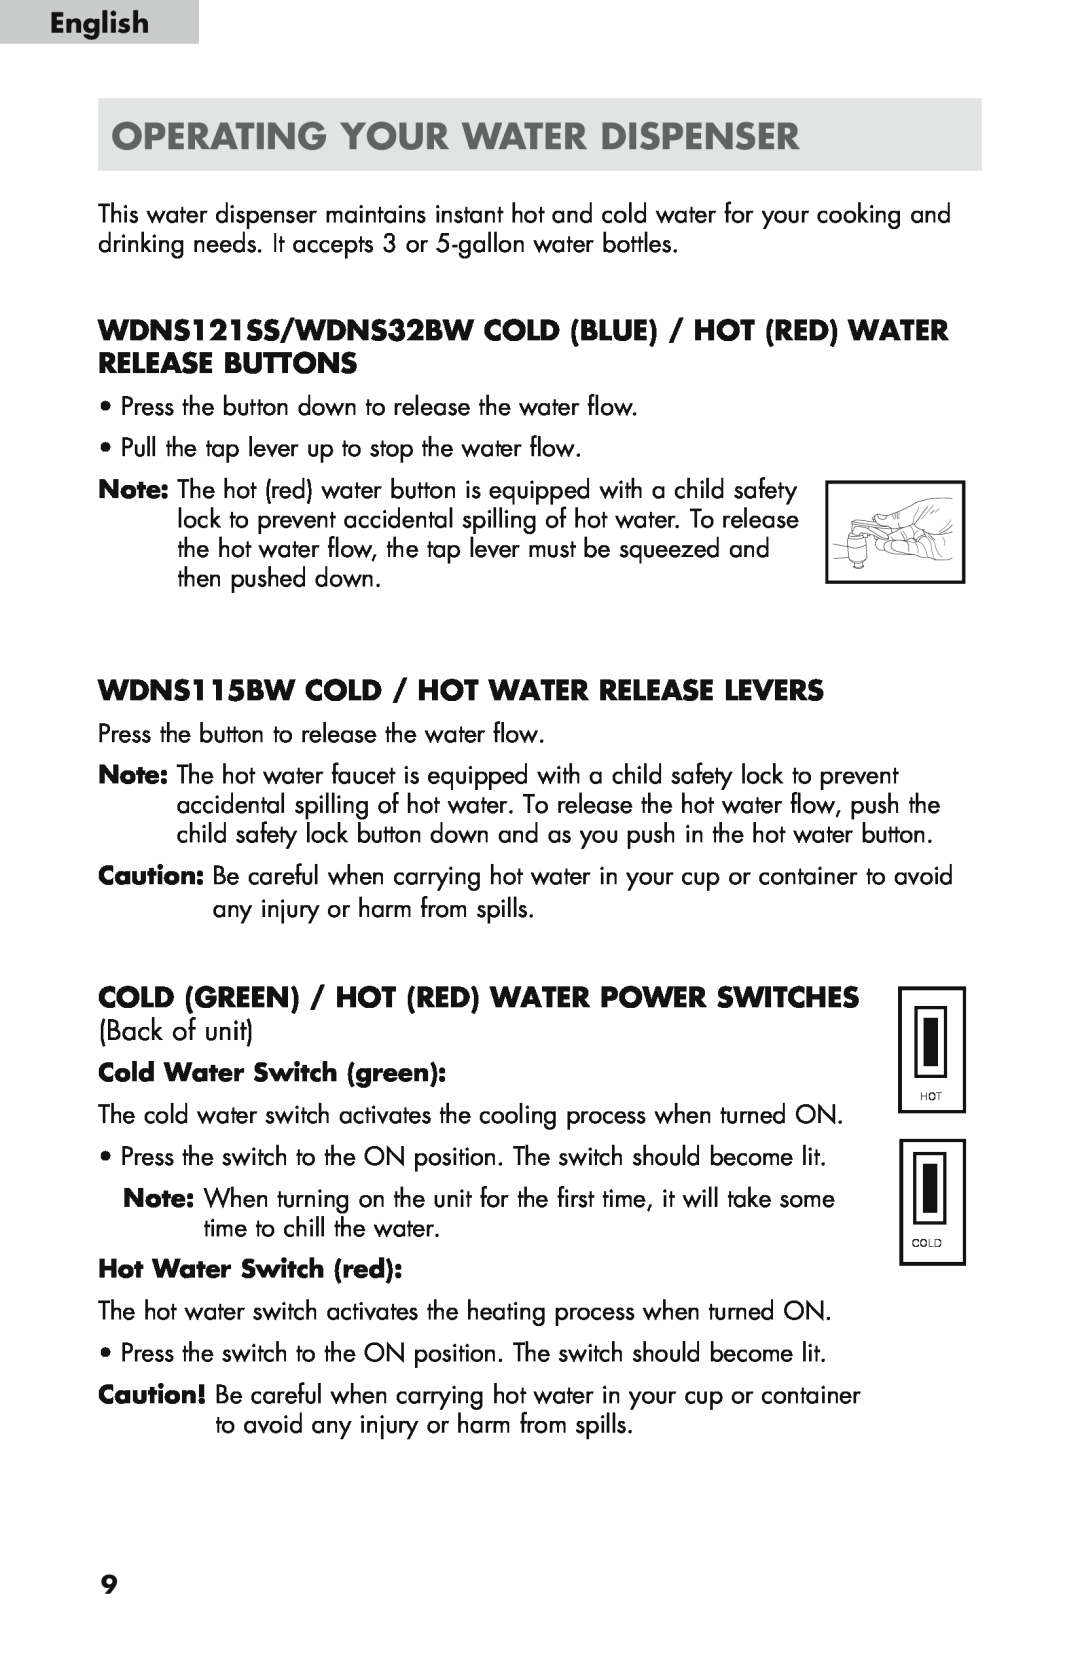 Haier WDNS121SS, WDNS32BW user manual Operating Your Water Dispenser, WDNS115BW Cold / Hot Water Release Levers, English 